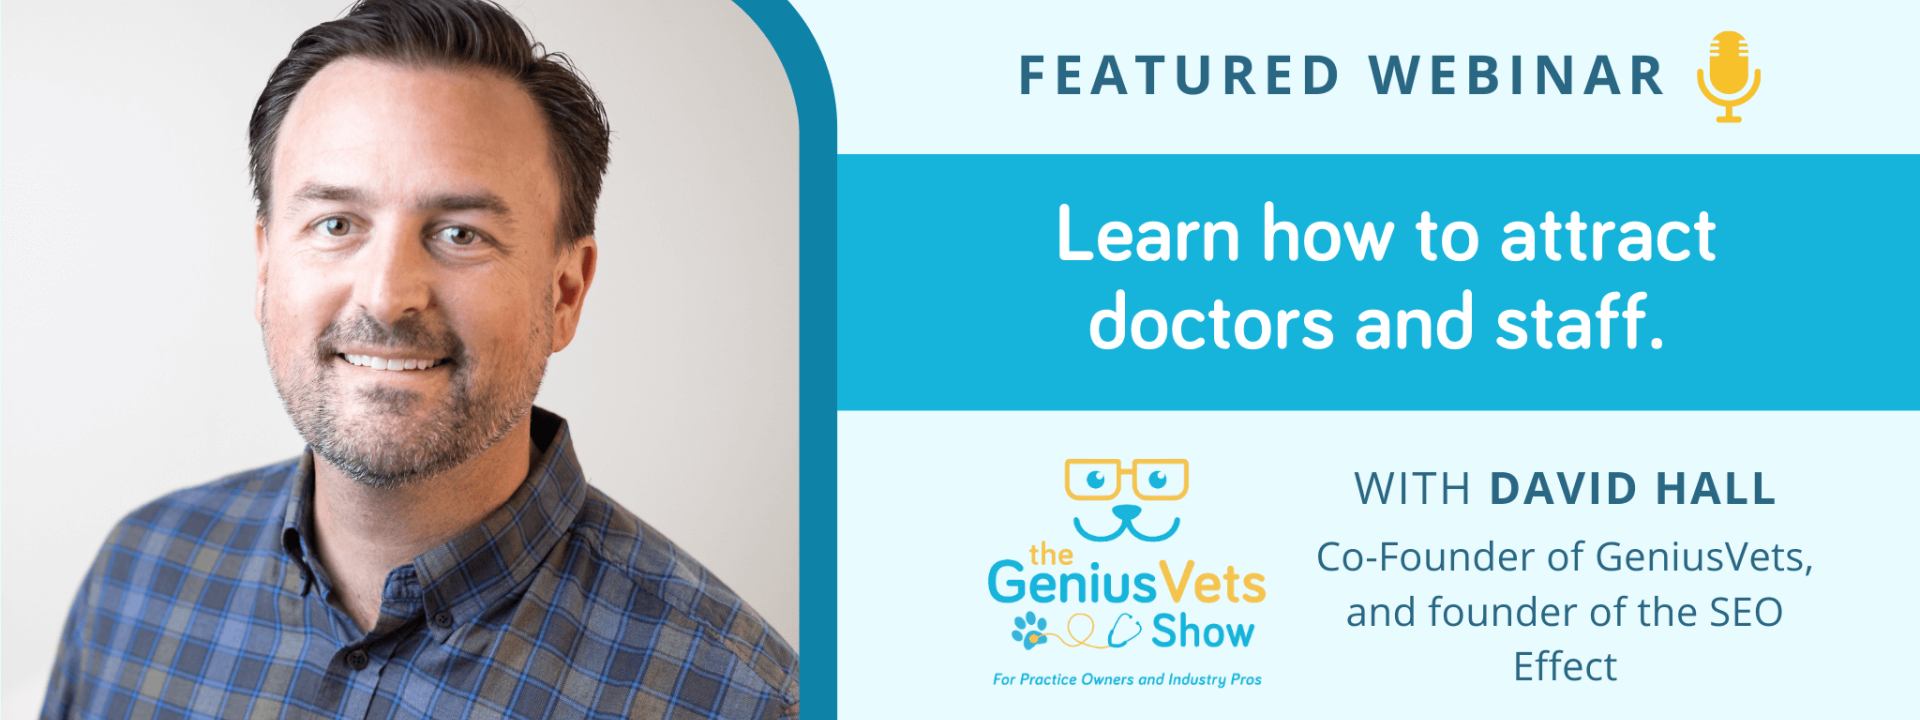 The GeniusVets Show with David Hall - Attract Doctors and Staff